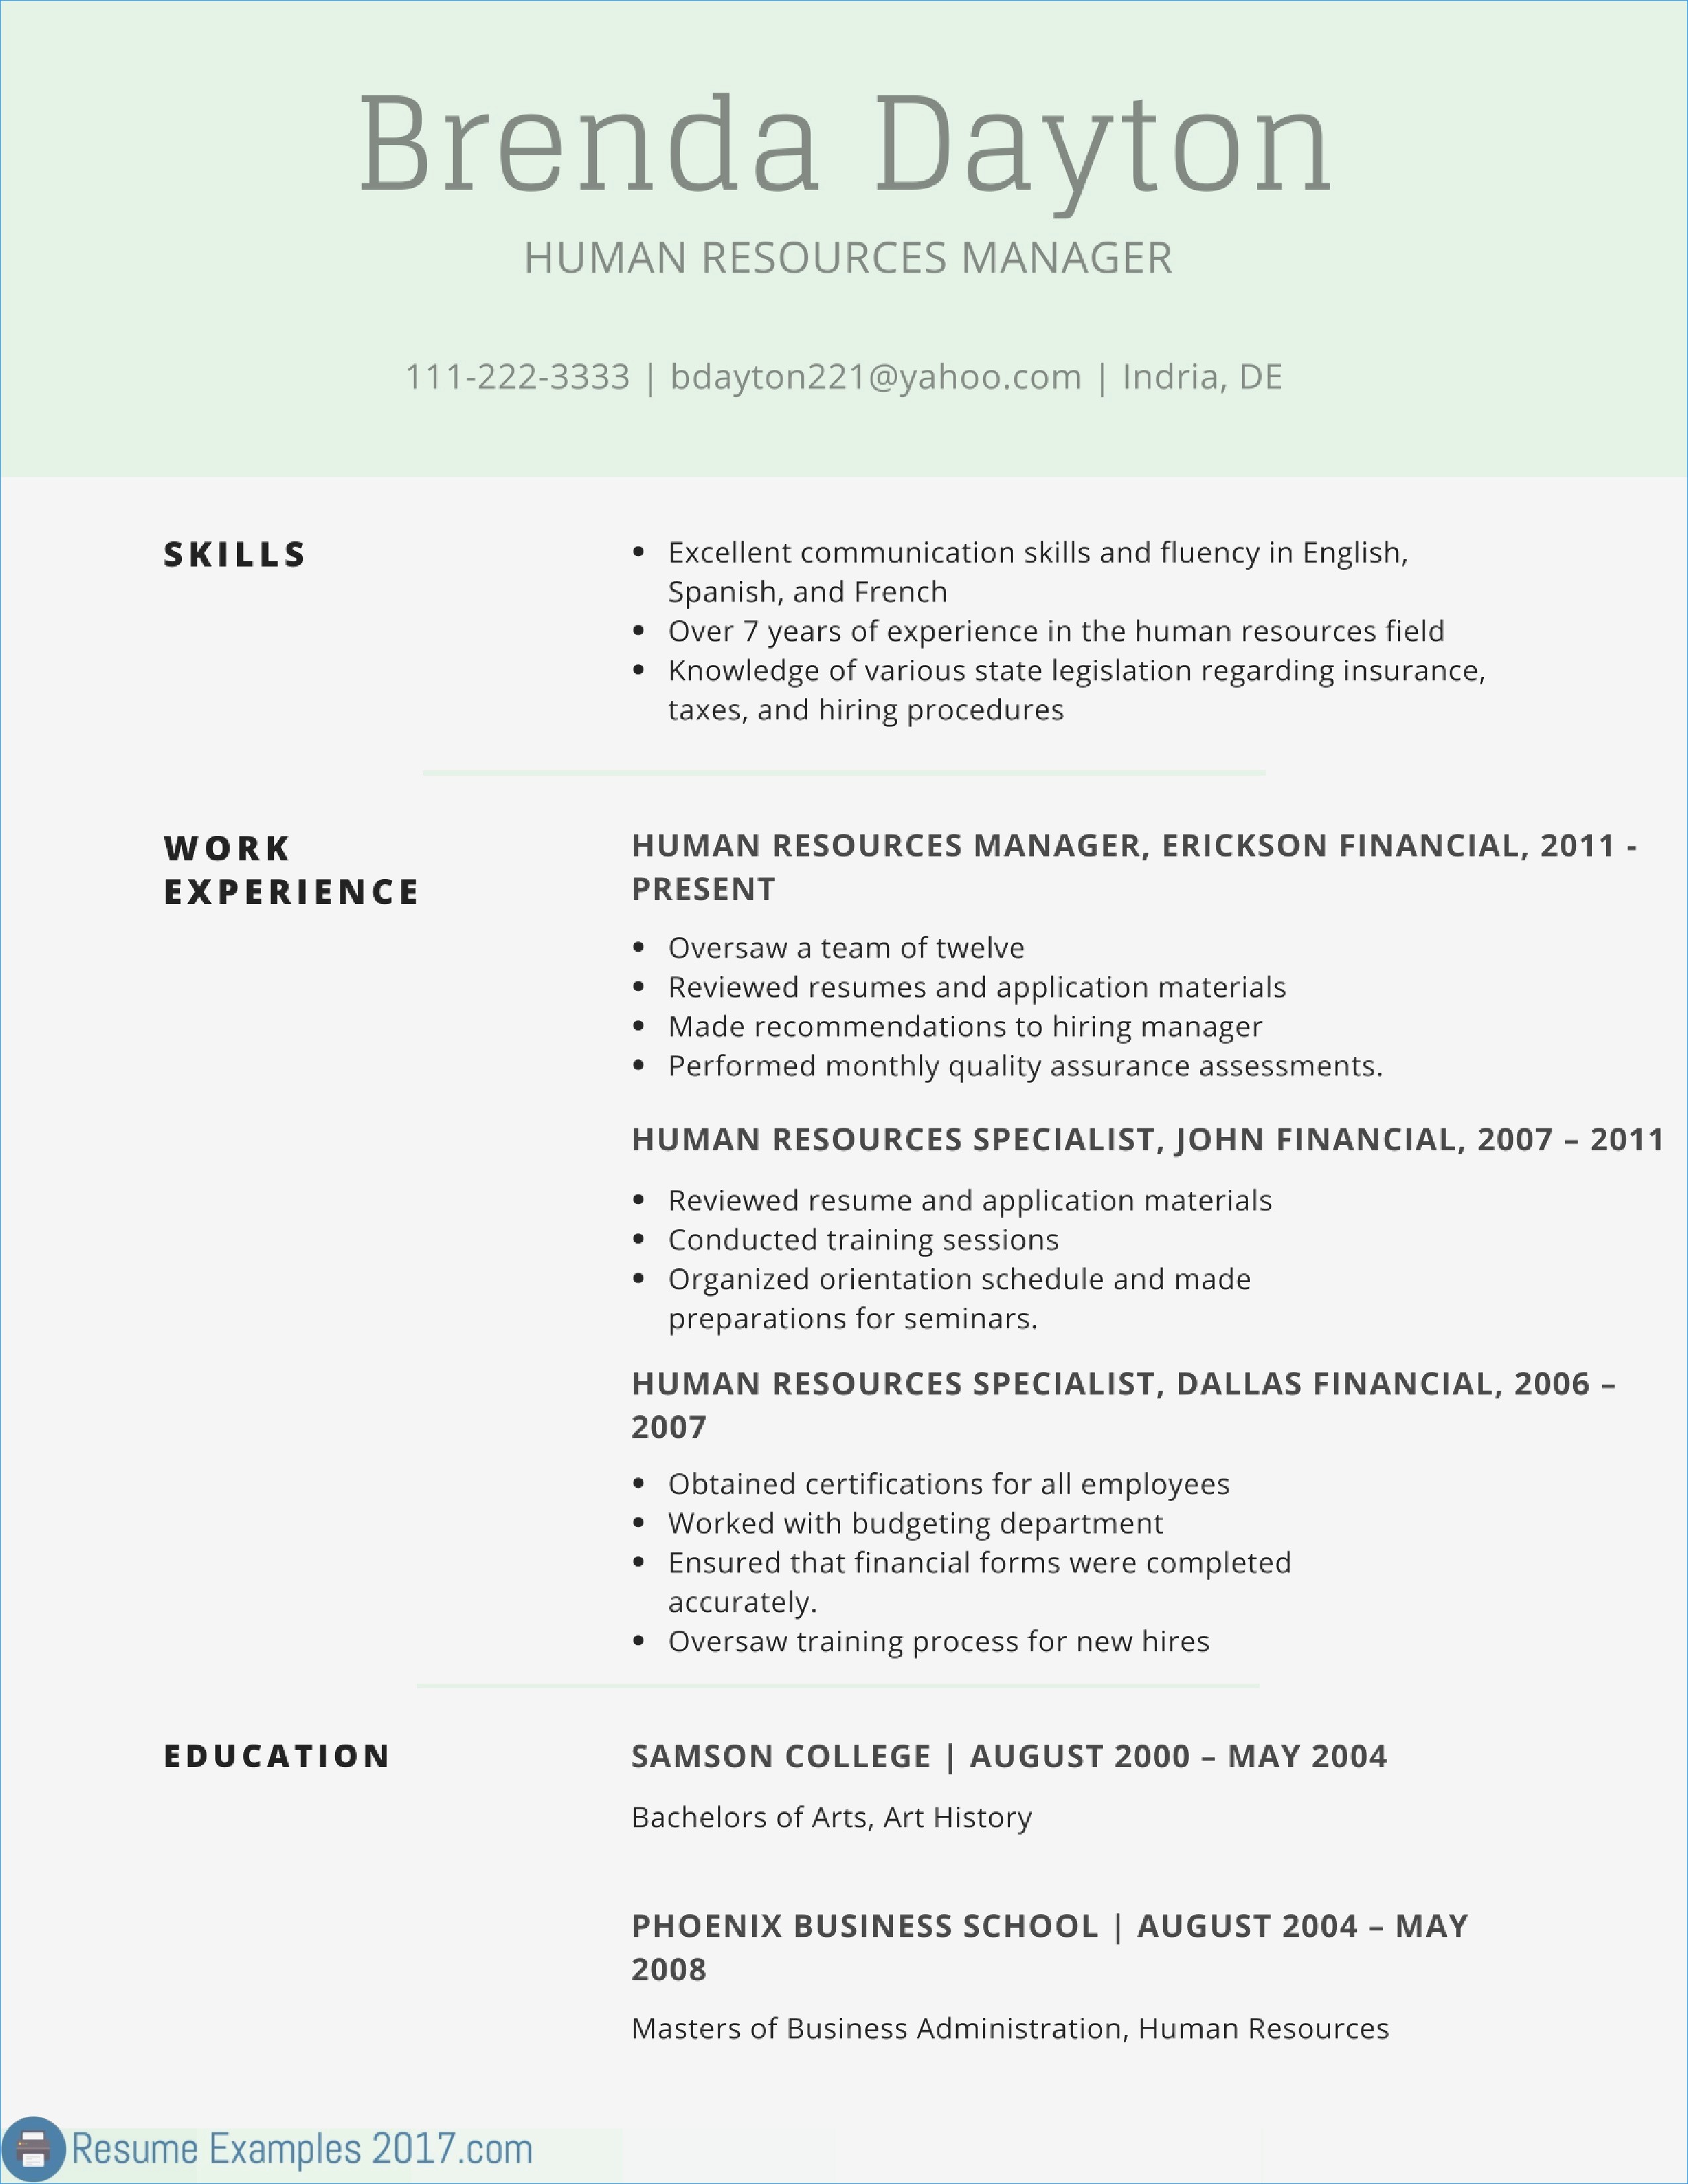 Great Cover Letters Great Cover Letter Examples New Hairstyles Good Cover Letter Examples Awe Inspiring Resume And Of Great Cover Letter Examples great cover letters|wikiresume.com